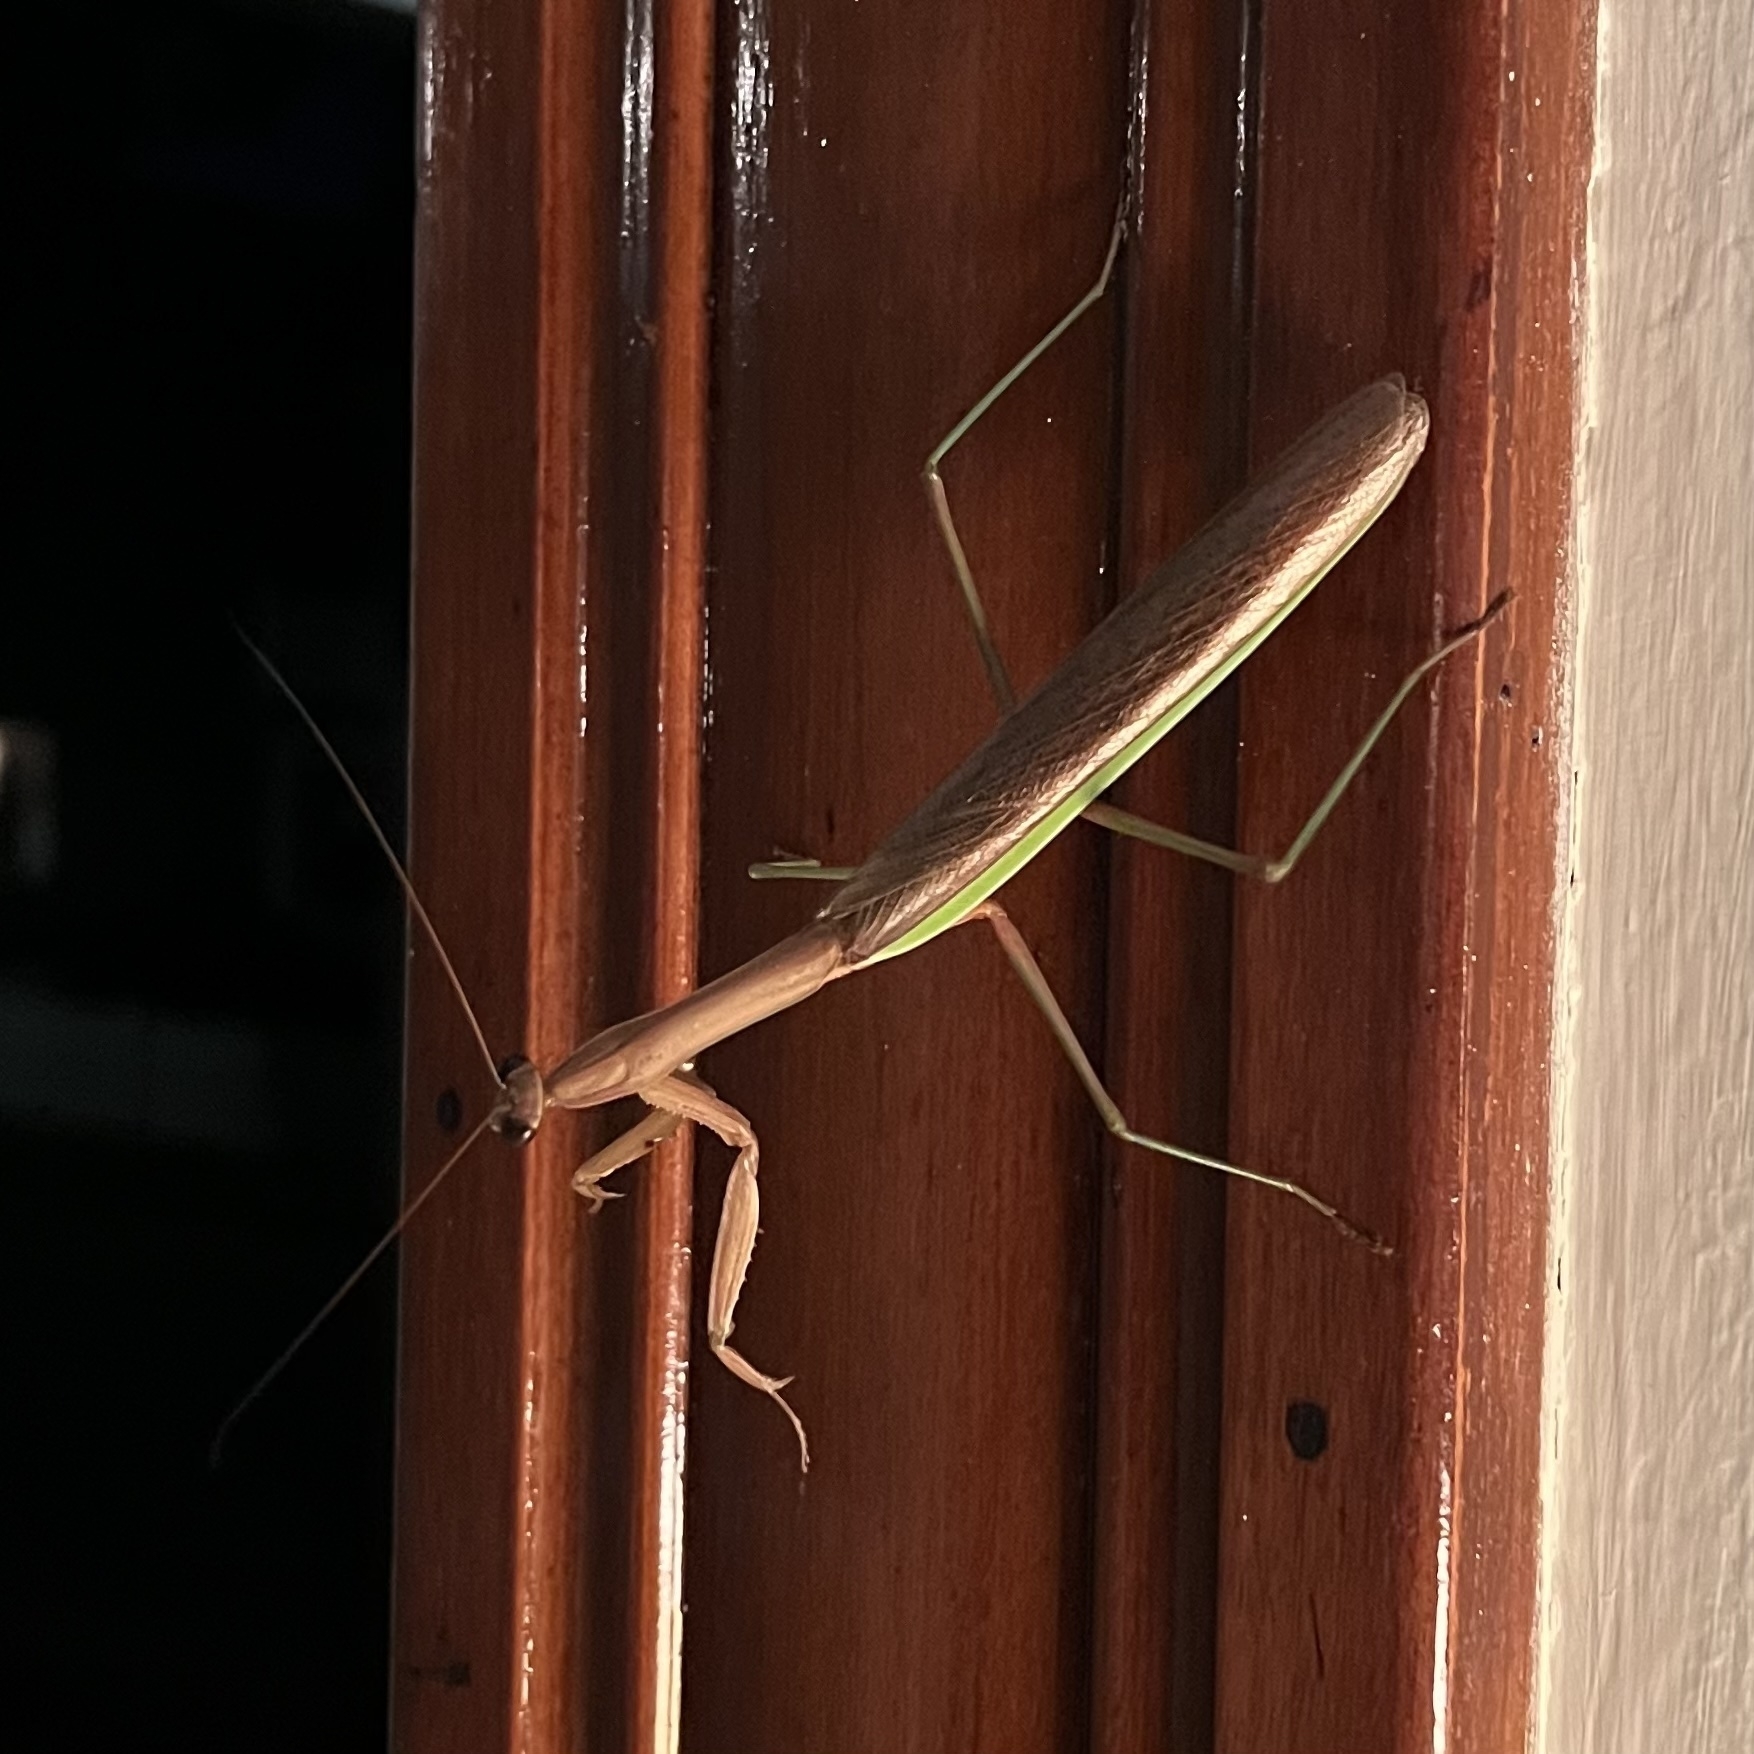 a large insect with brown and green body, long legs, and stick-like appearance, resting on the indoor side of a lacquered dark wood door frame, with dark night visible out the open door